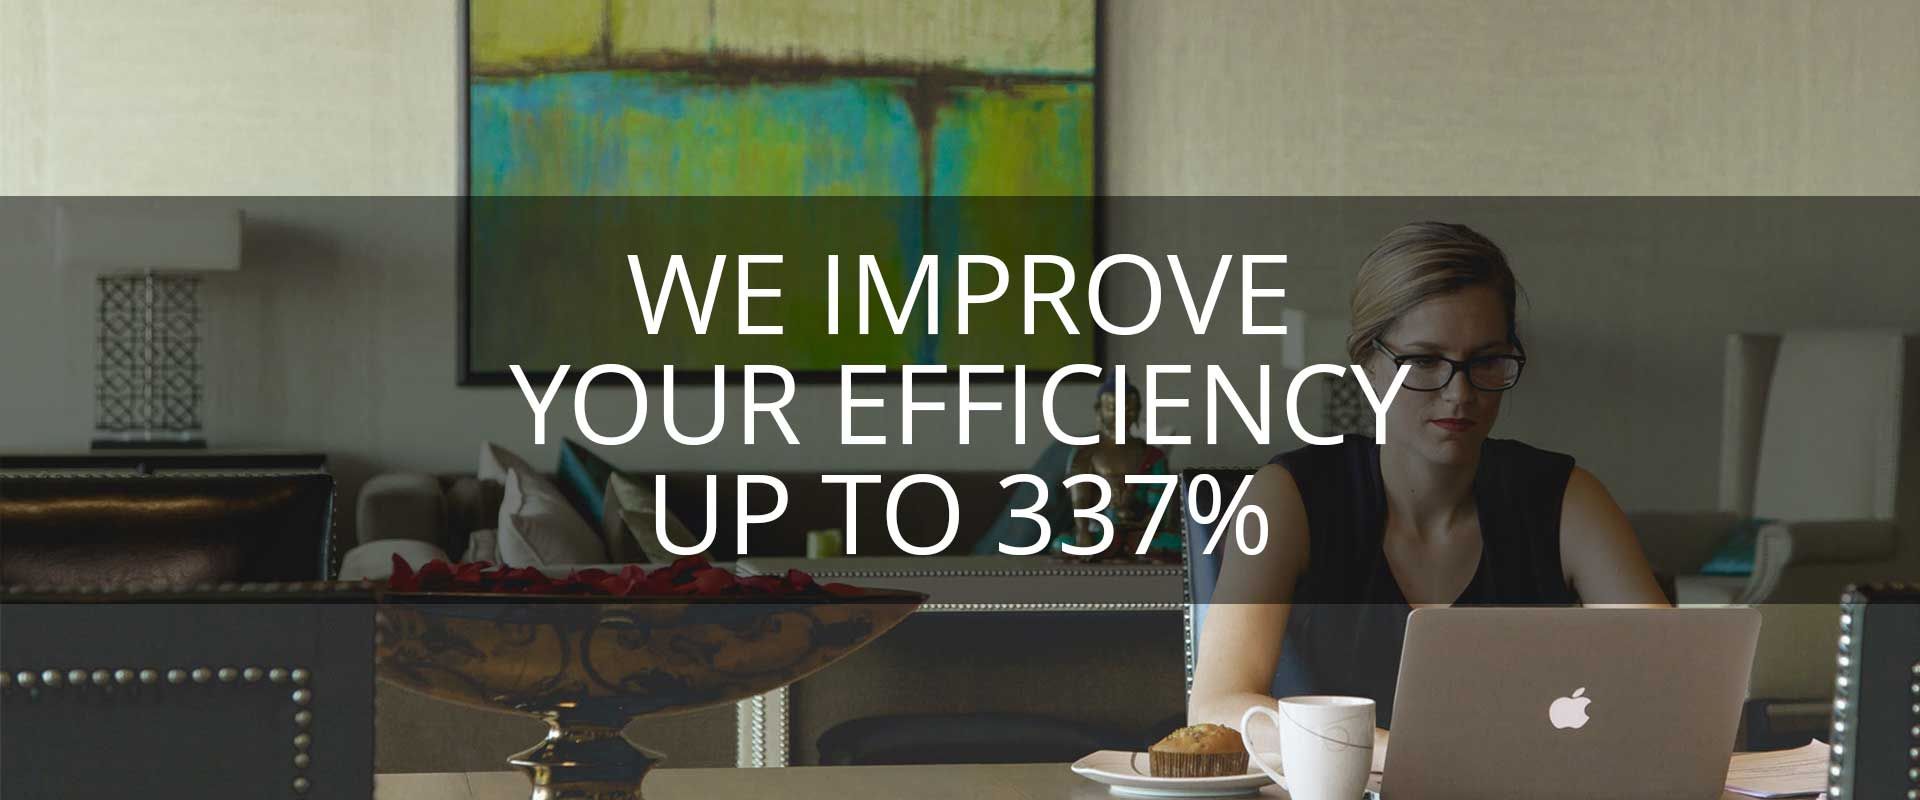 We improve your efficiency up to 400%